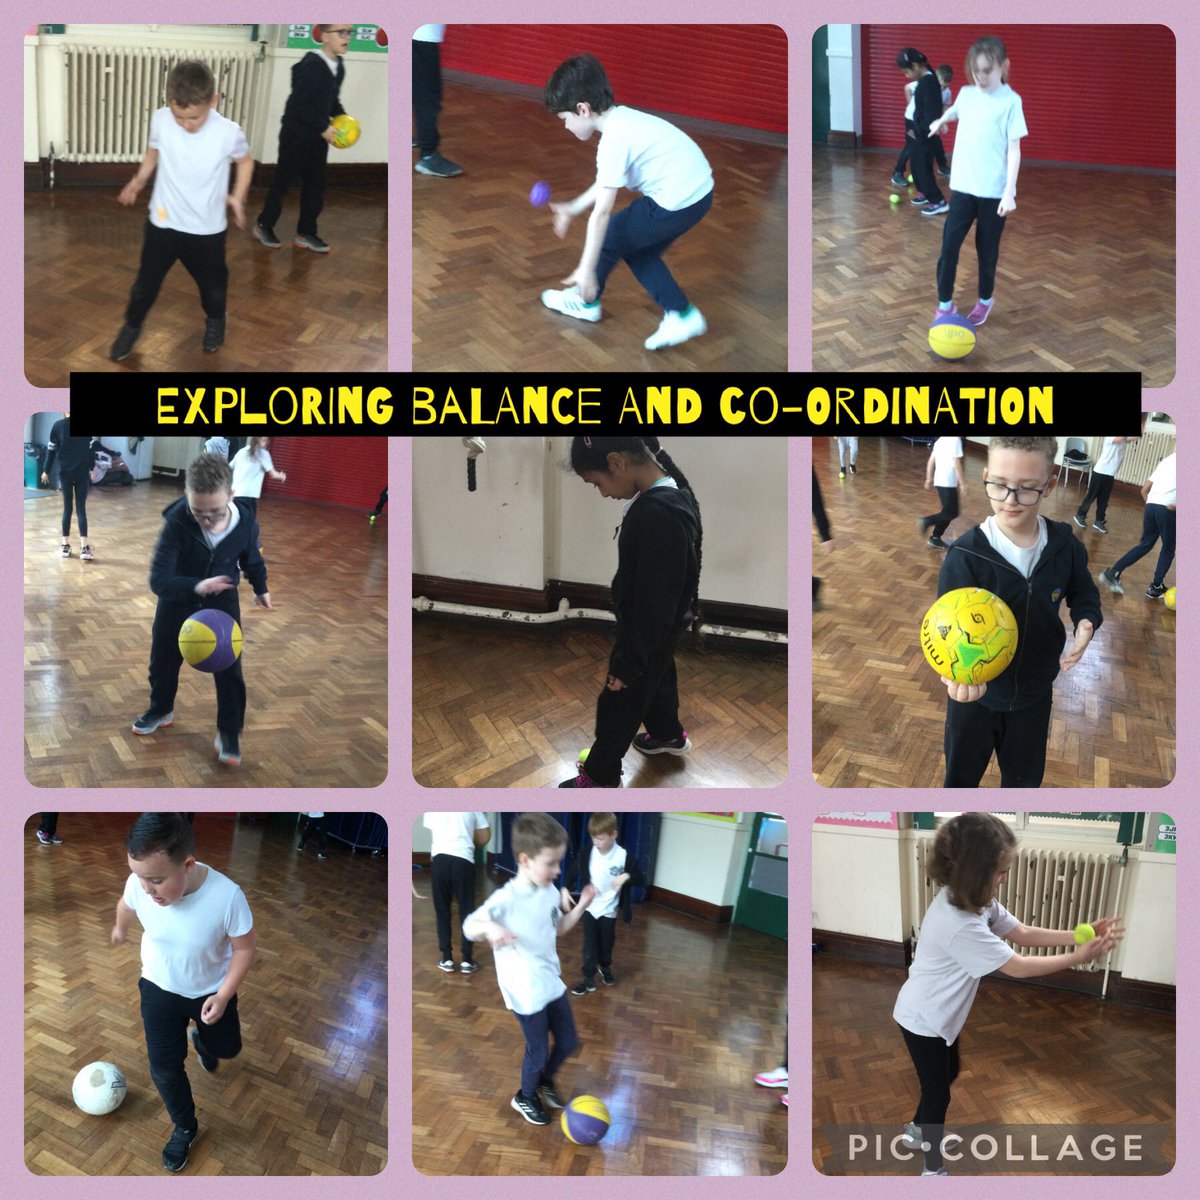 Today in PE we were exploring balance and co-ordination using different shaped and sized balls! 🏀🎾⚽️🏐 #Year3 #PE #Balance #Coordination @WarstonesP